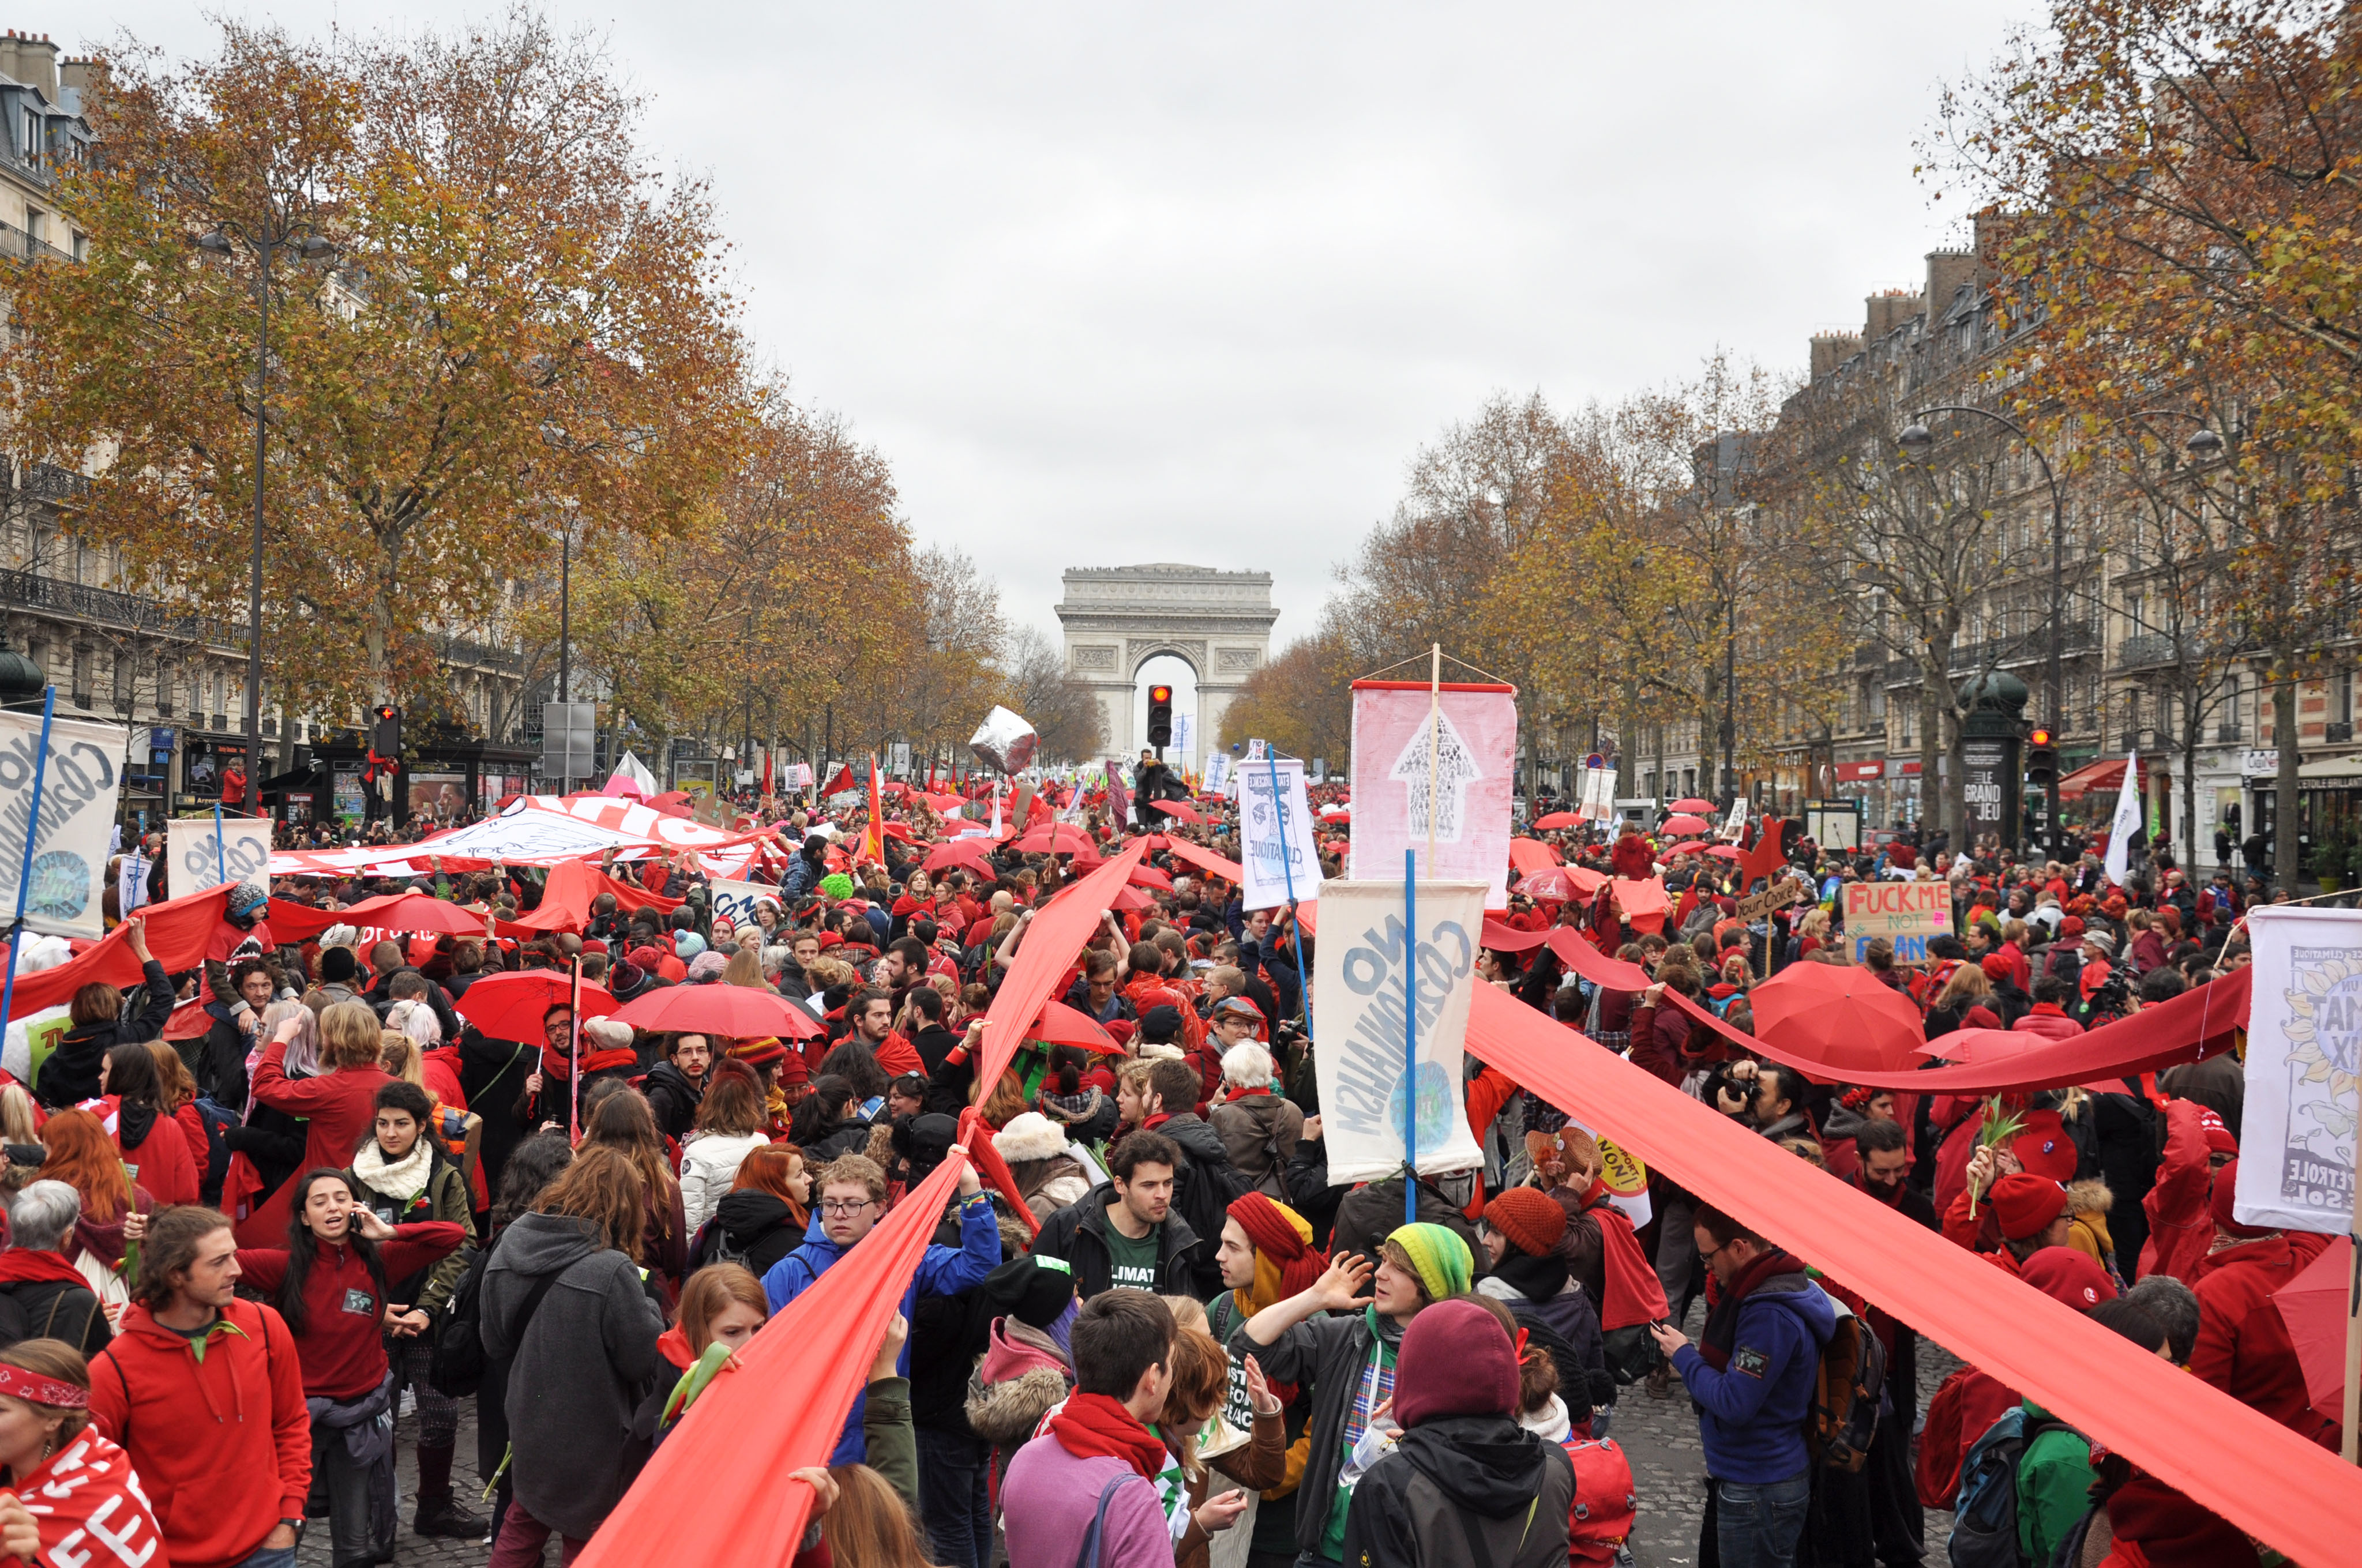 COP21 climate justice environment protest